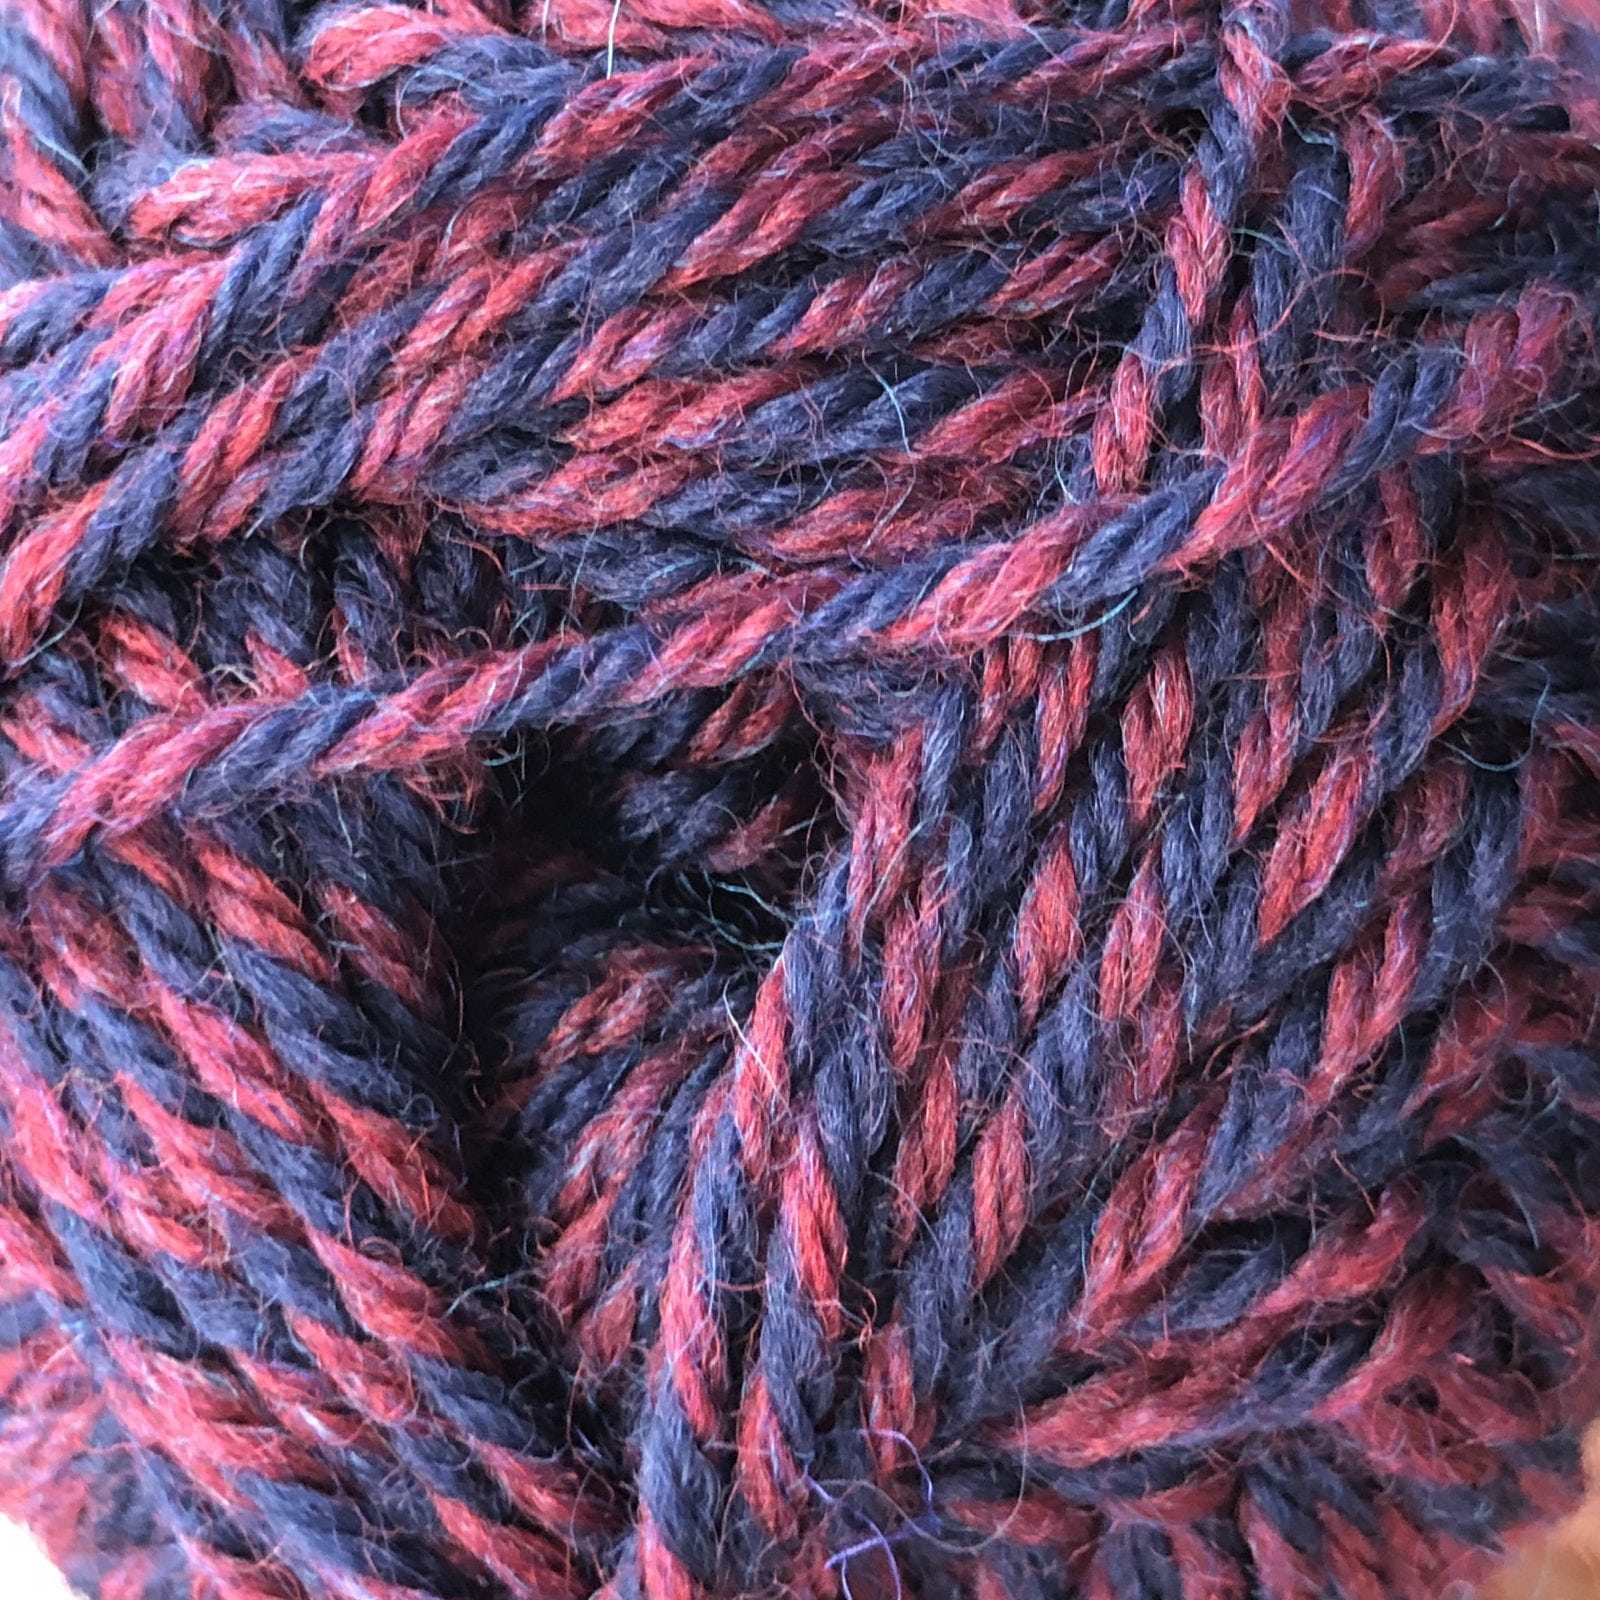 Countrywide Windsor 100% New Zealand wool yarn 8ply Marl Marled 8 ply double knit dk Burgundy - Navy Shade 2783